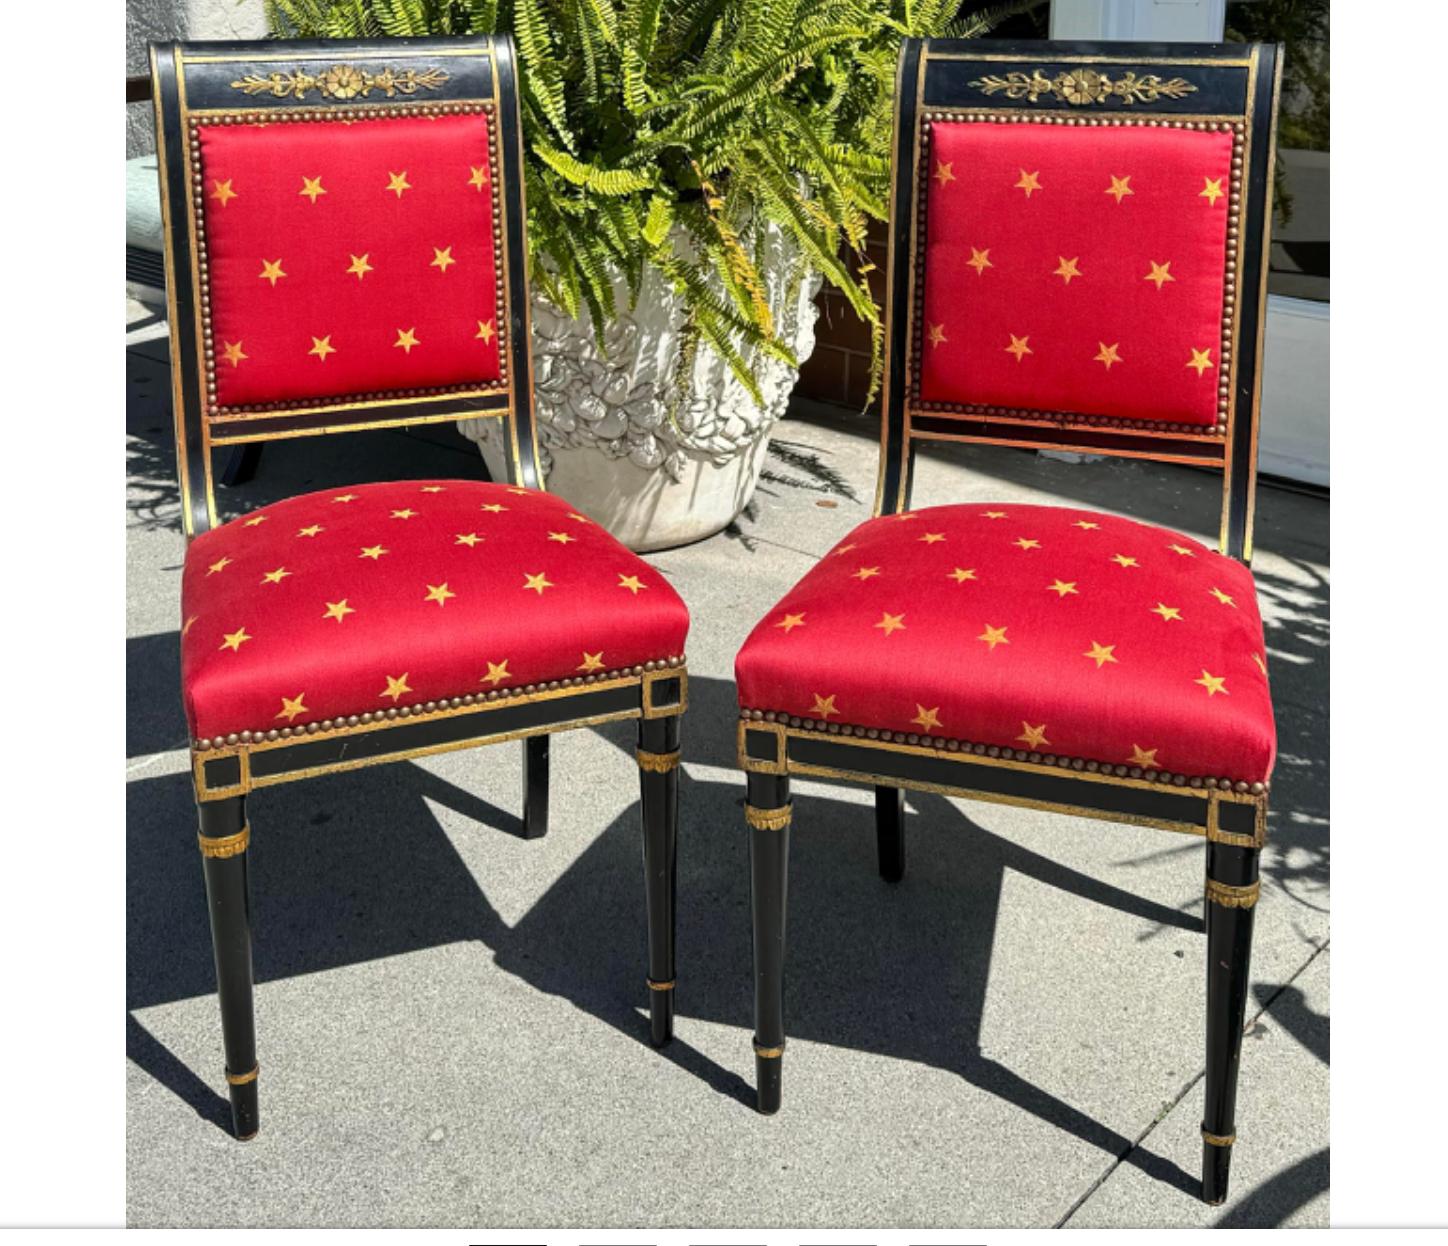 Pair of Antique Empire Black & Gold Chairs W Red Clarence House Seats In Good Condition For Sale In LOS ANGELES, CA